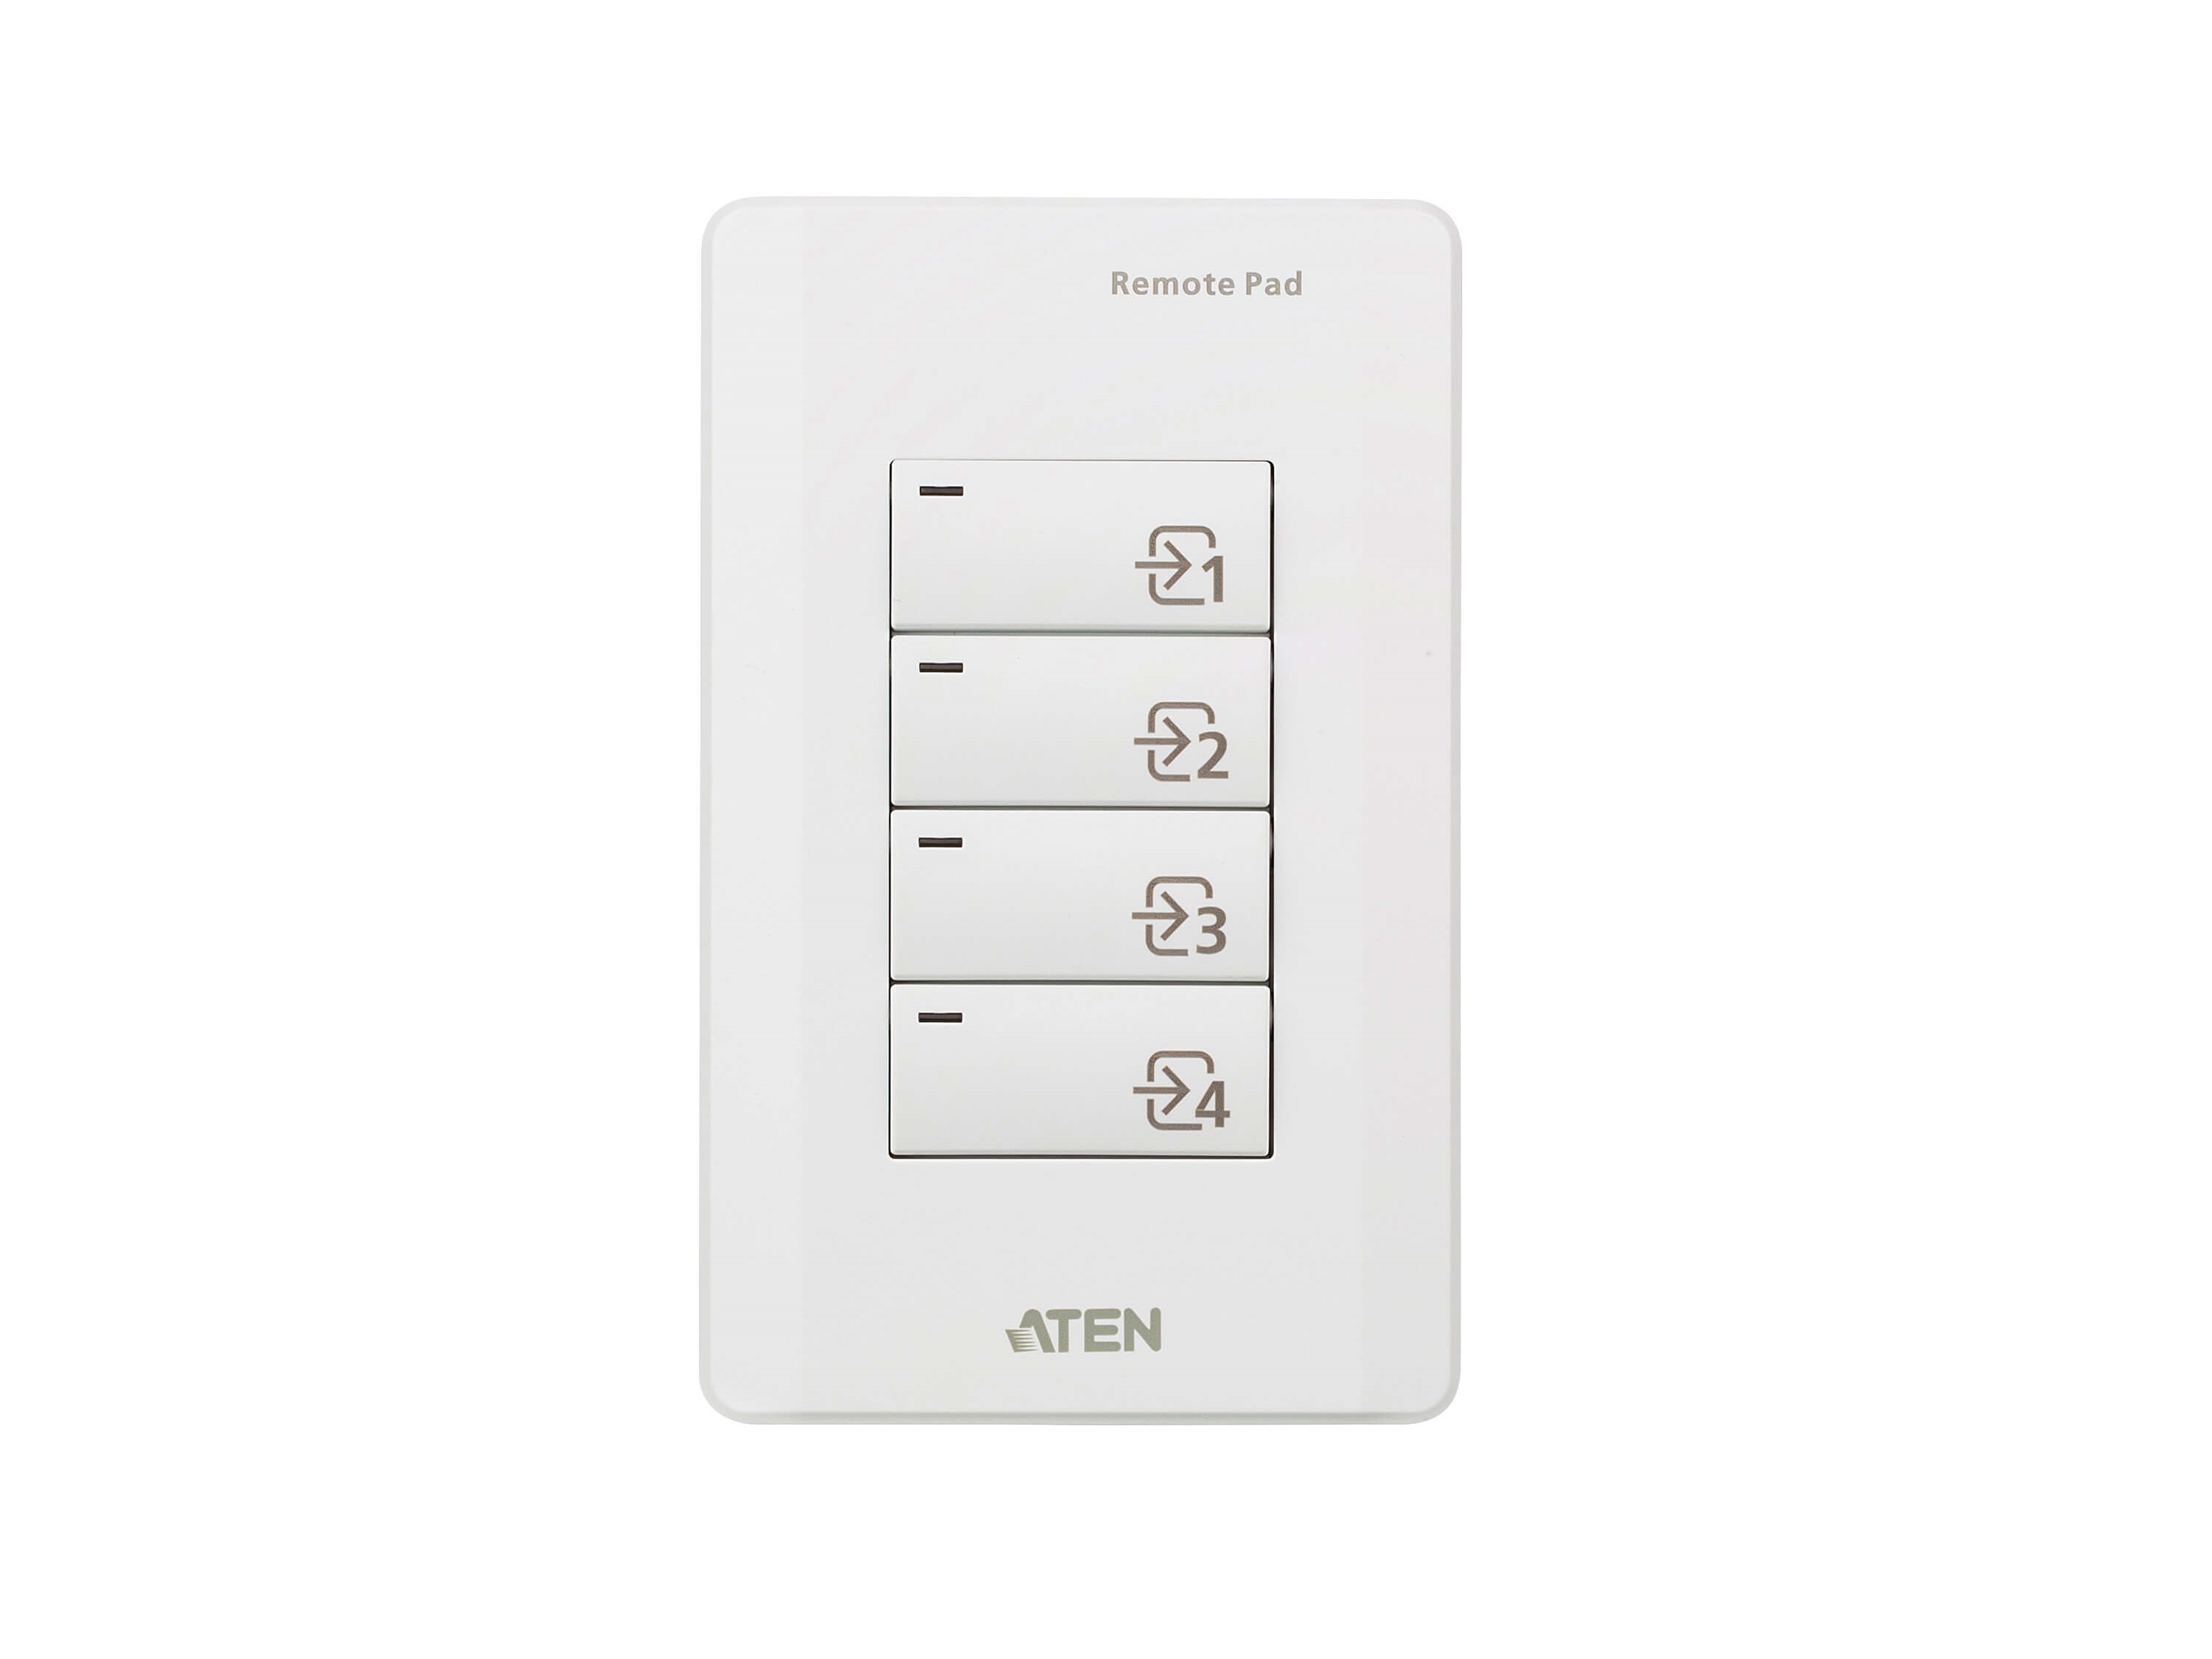 VPK104 4-Key Contact Closure Remote Pad by Aten